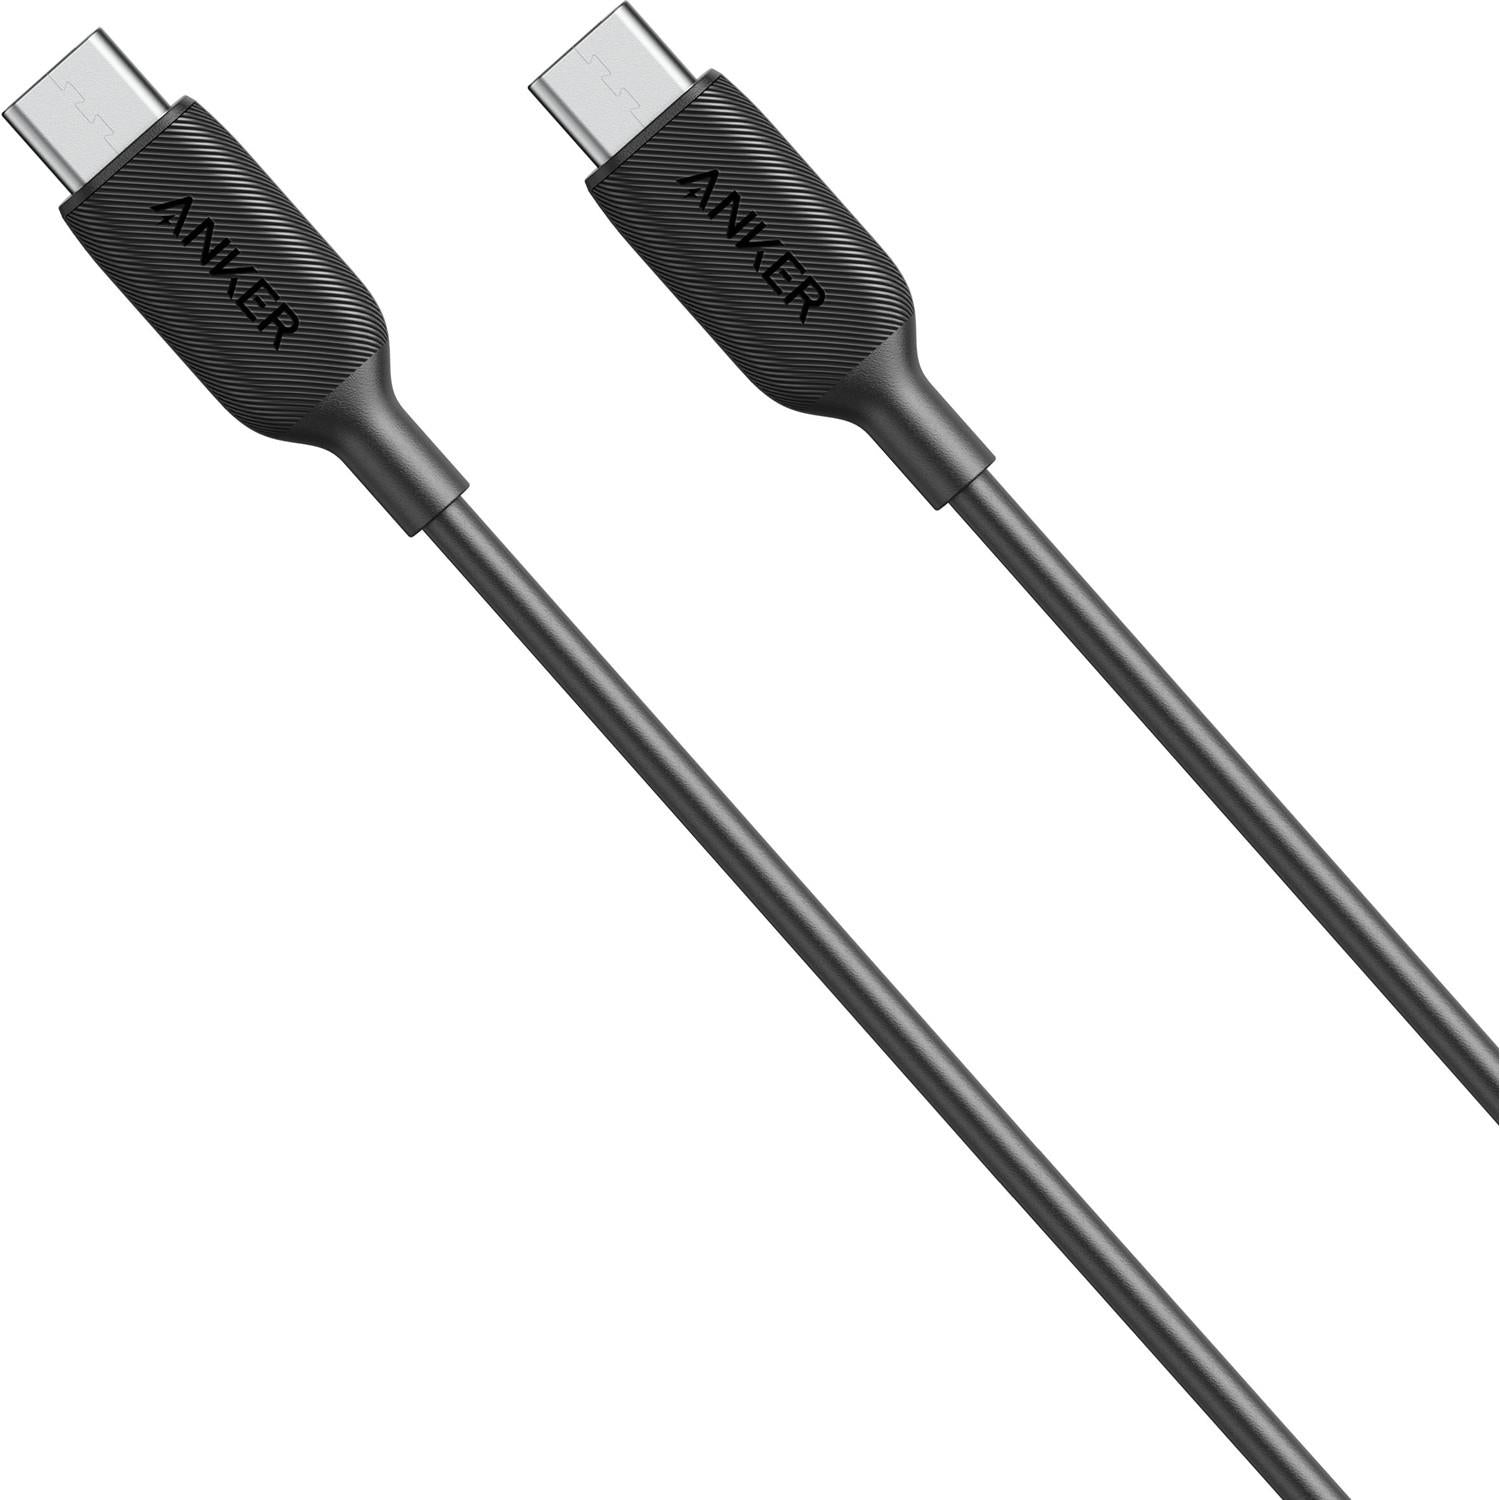 Anker PowerLine III USB-C To USB-C 0.9 Meter Data/Charging Cable - Black - 60W Power Support